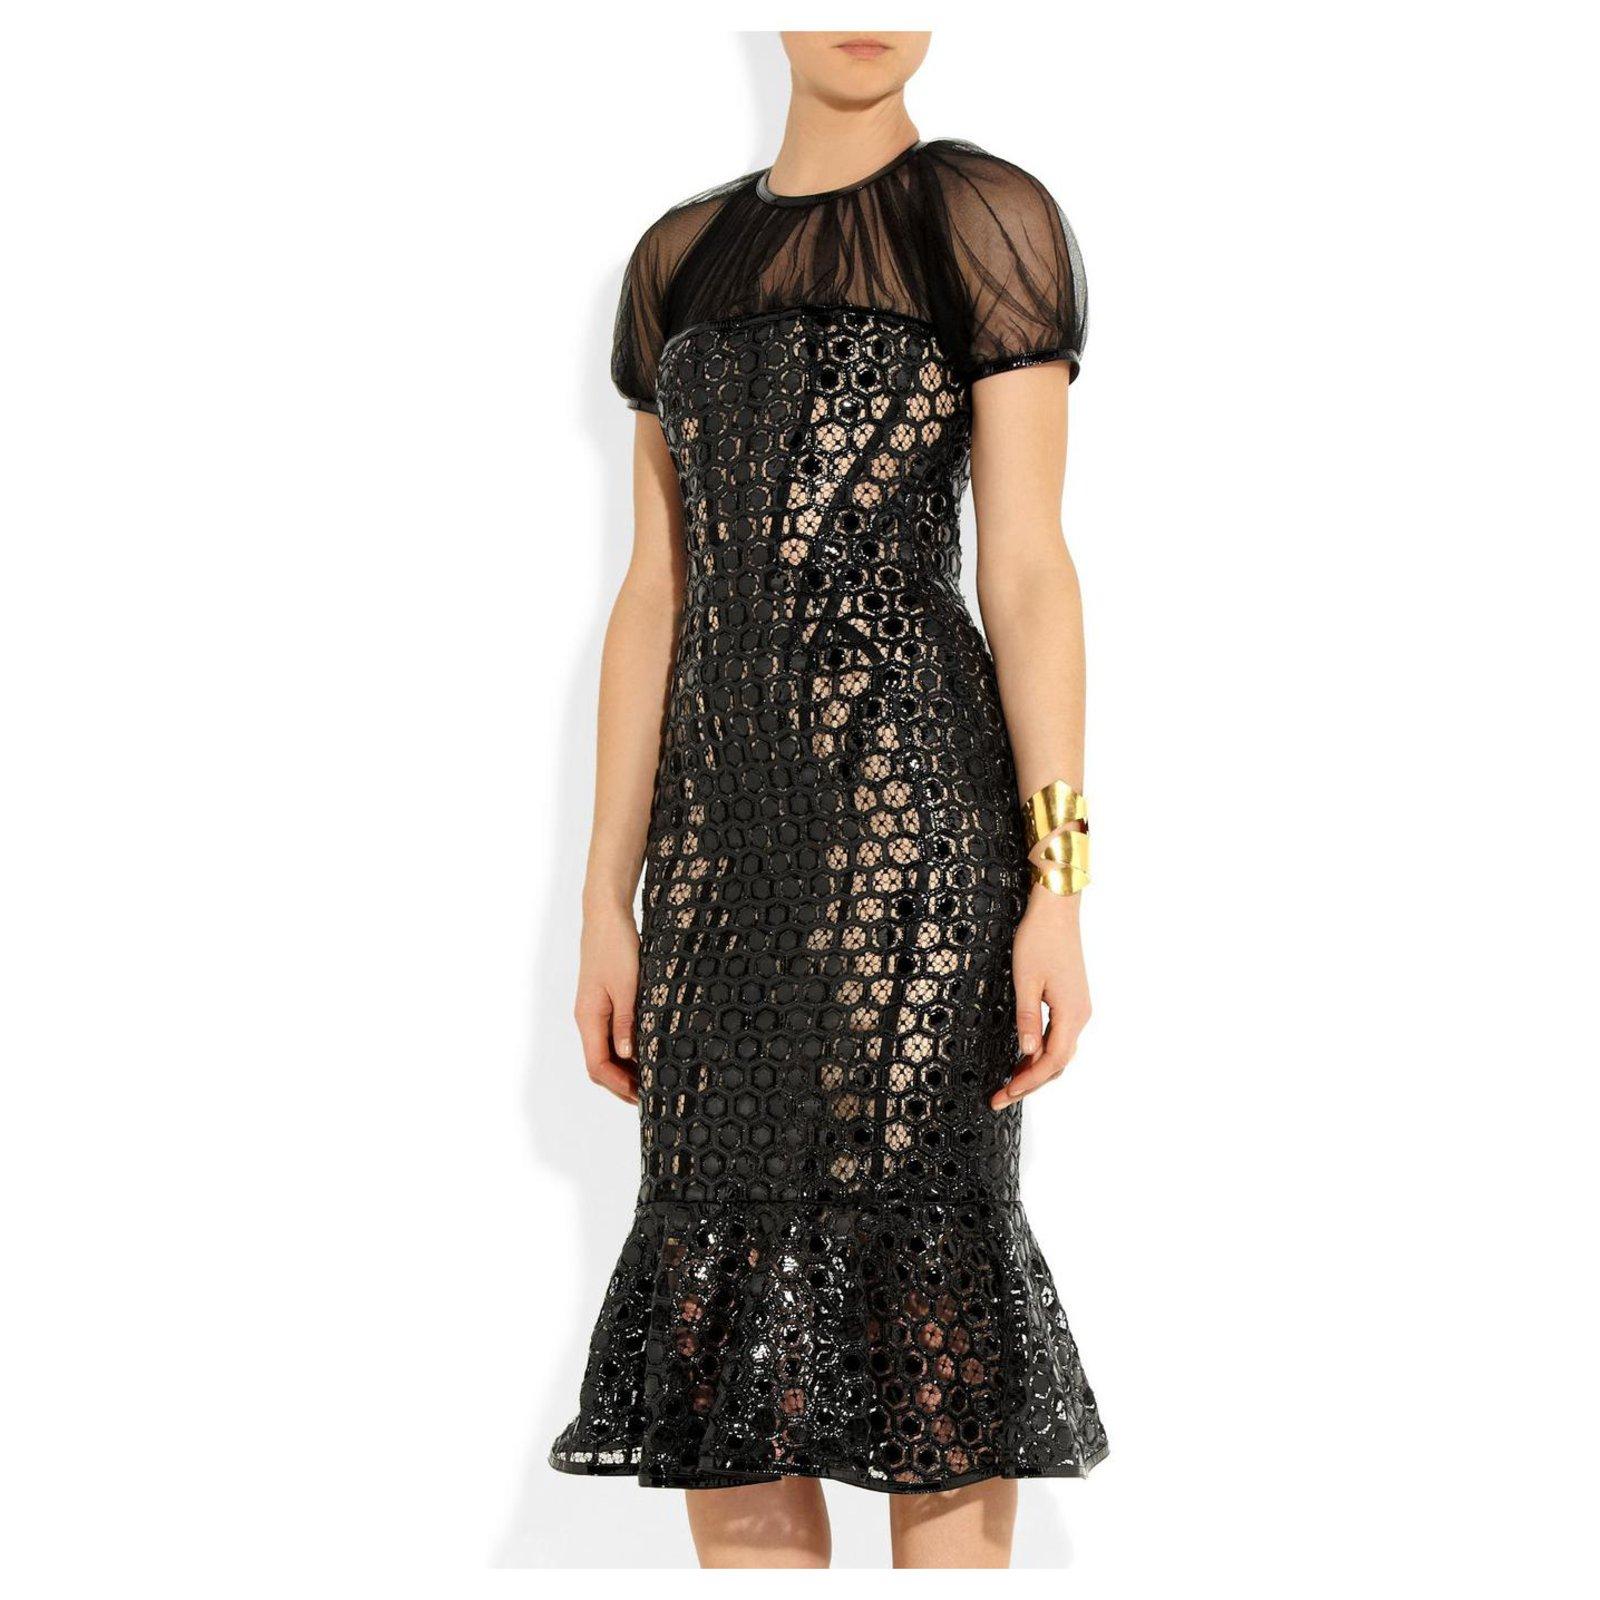 ALEXANDER MCQUEEN Black honeycomb-effect patent-leather and net
Italian size 38 or US 2
Double-layered sheer silk-tulle yoke and sleeves, patent-leather trims, visible boned nude and black bodice, fully lined in silk-organza.
Exposed zip fastening